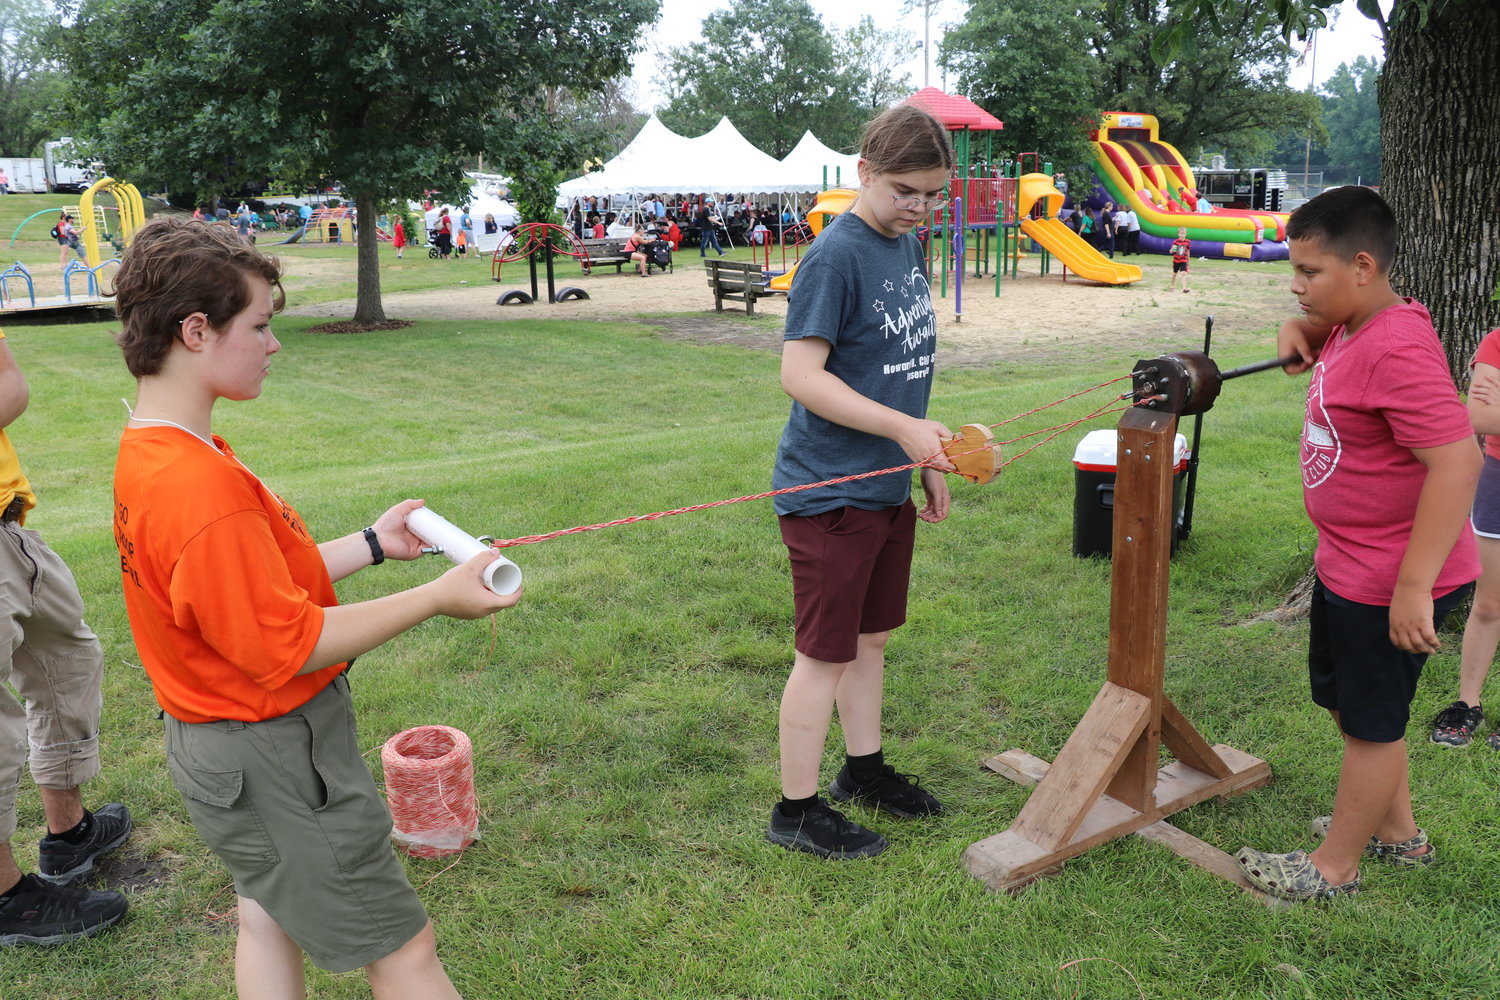 Scouts from Troop #234 held demonstrations on rope making.